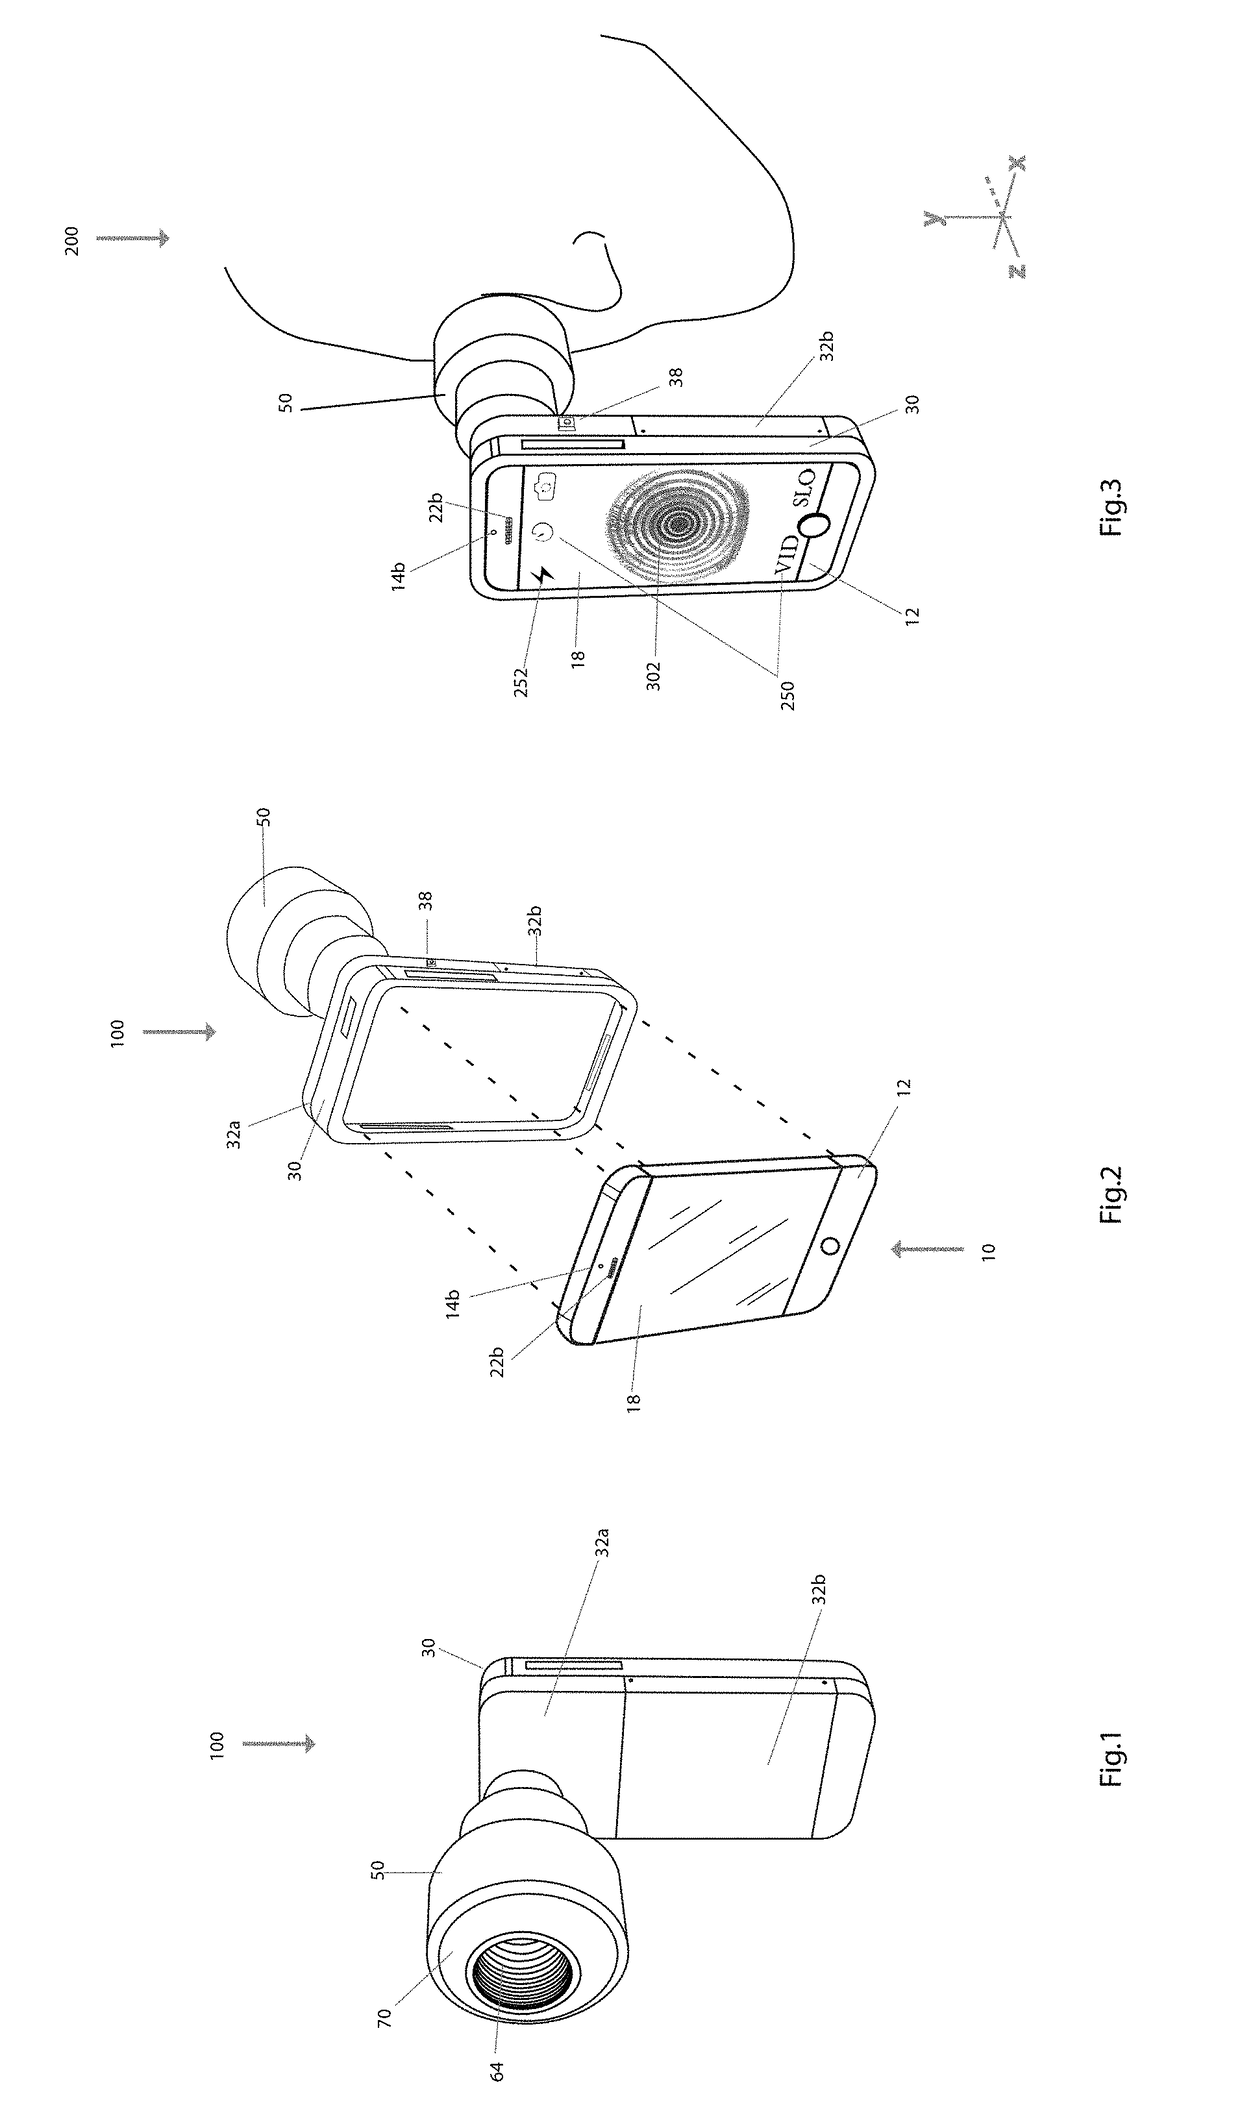 System and method for ophthalmological imaging adapted to a mobile processing device